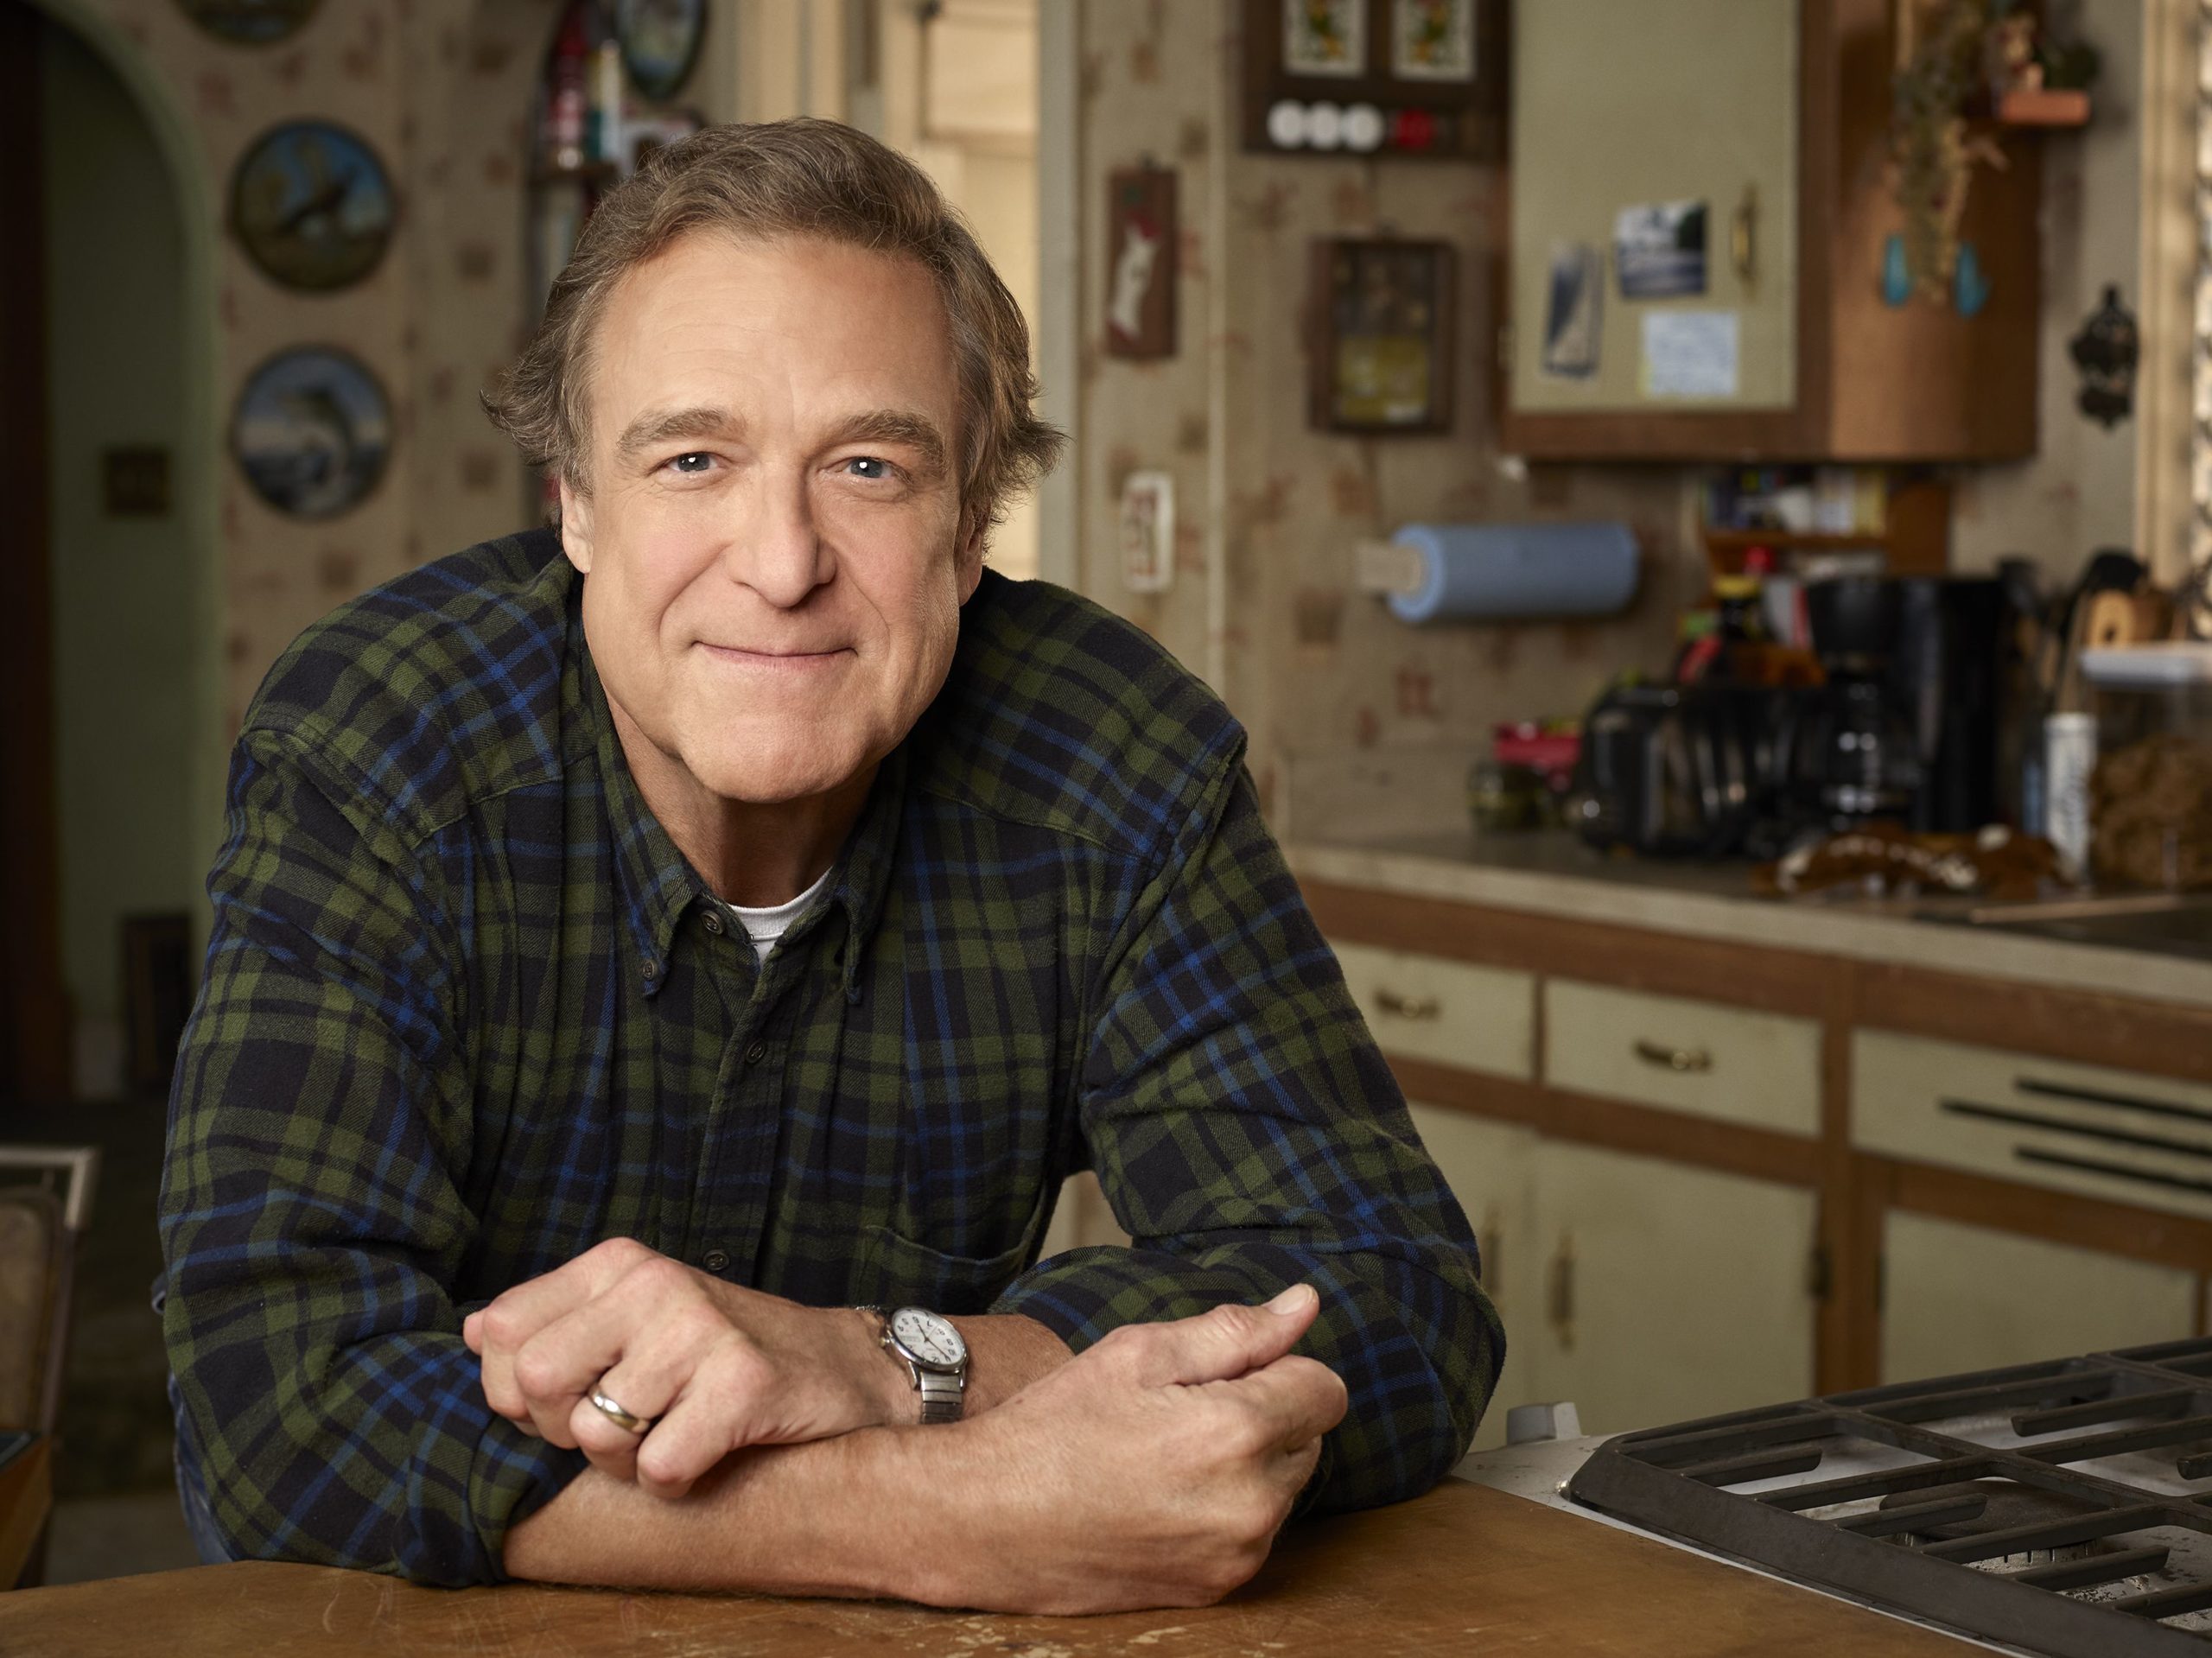 The Conners Season 4 Release Date, Cast and More: Everything We Know